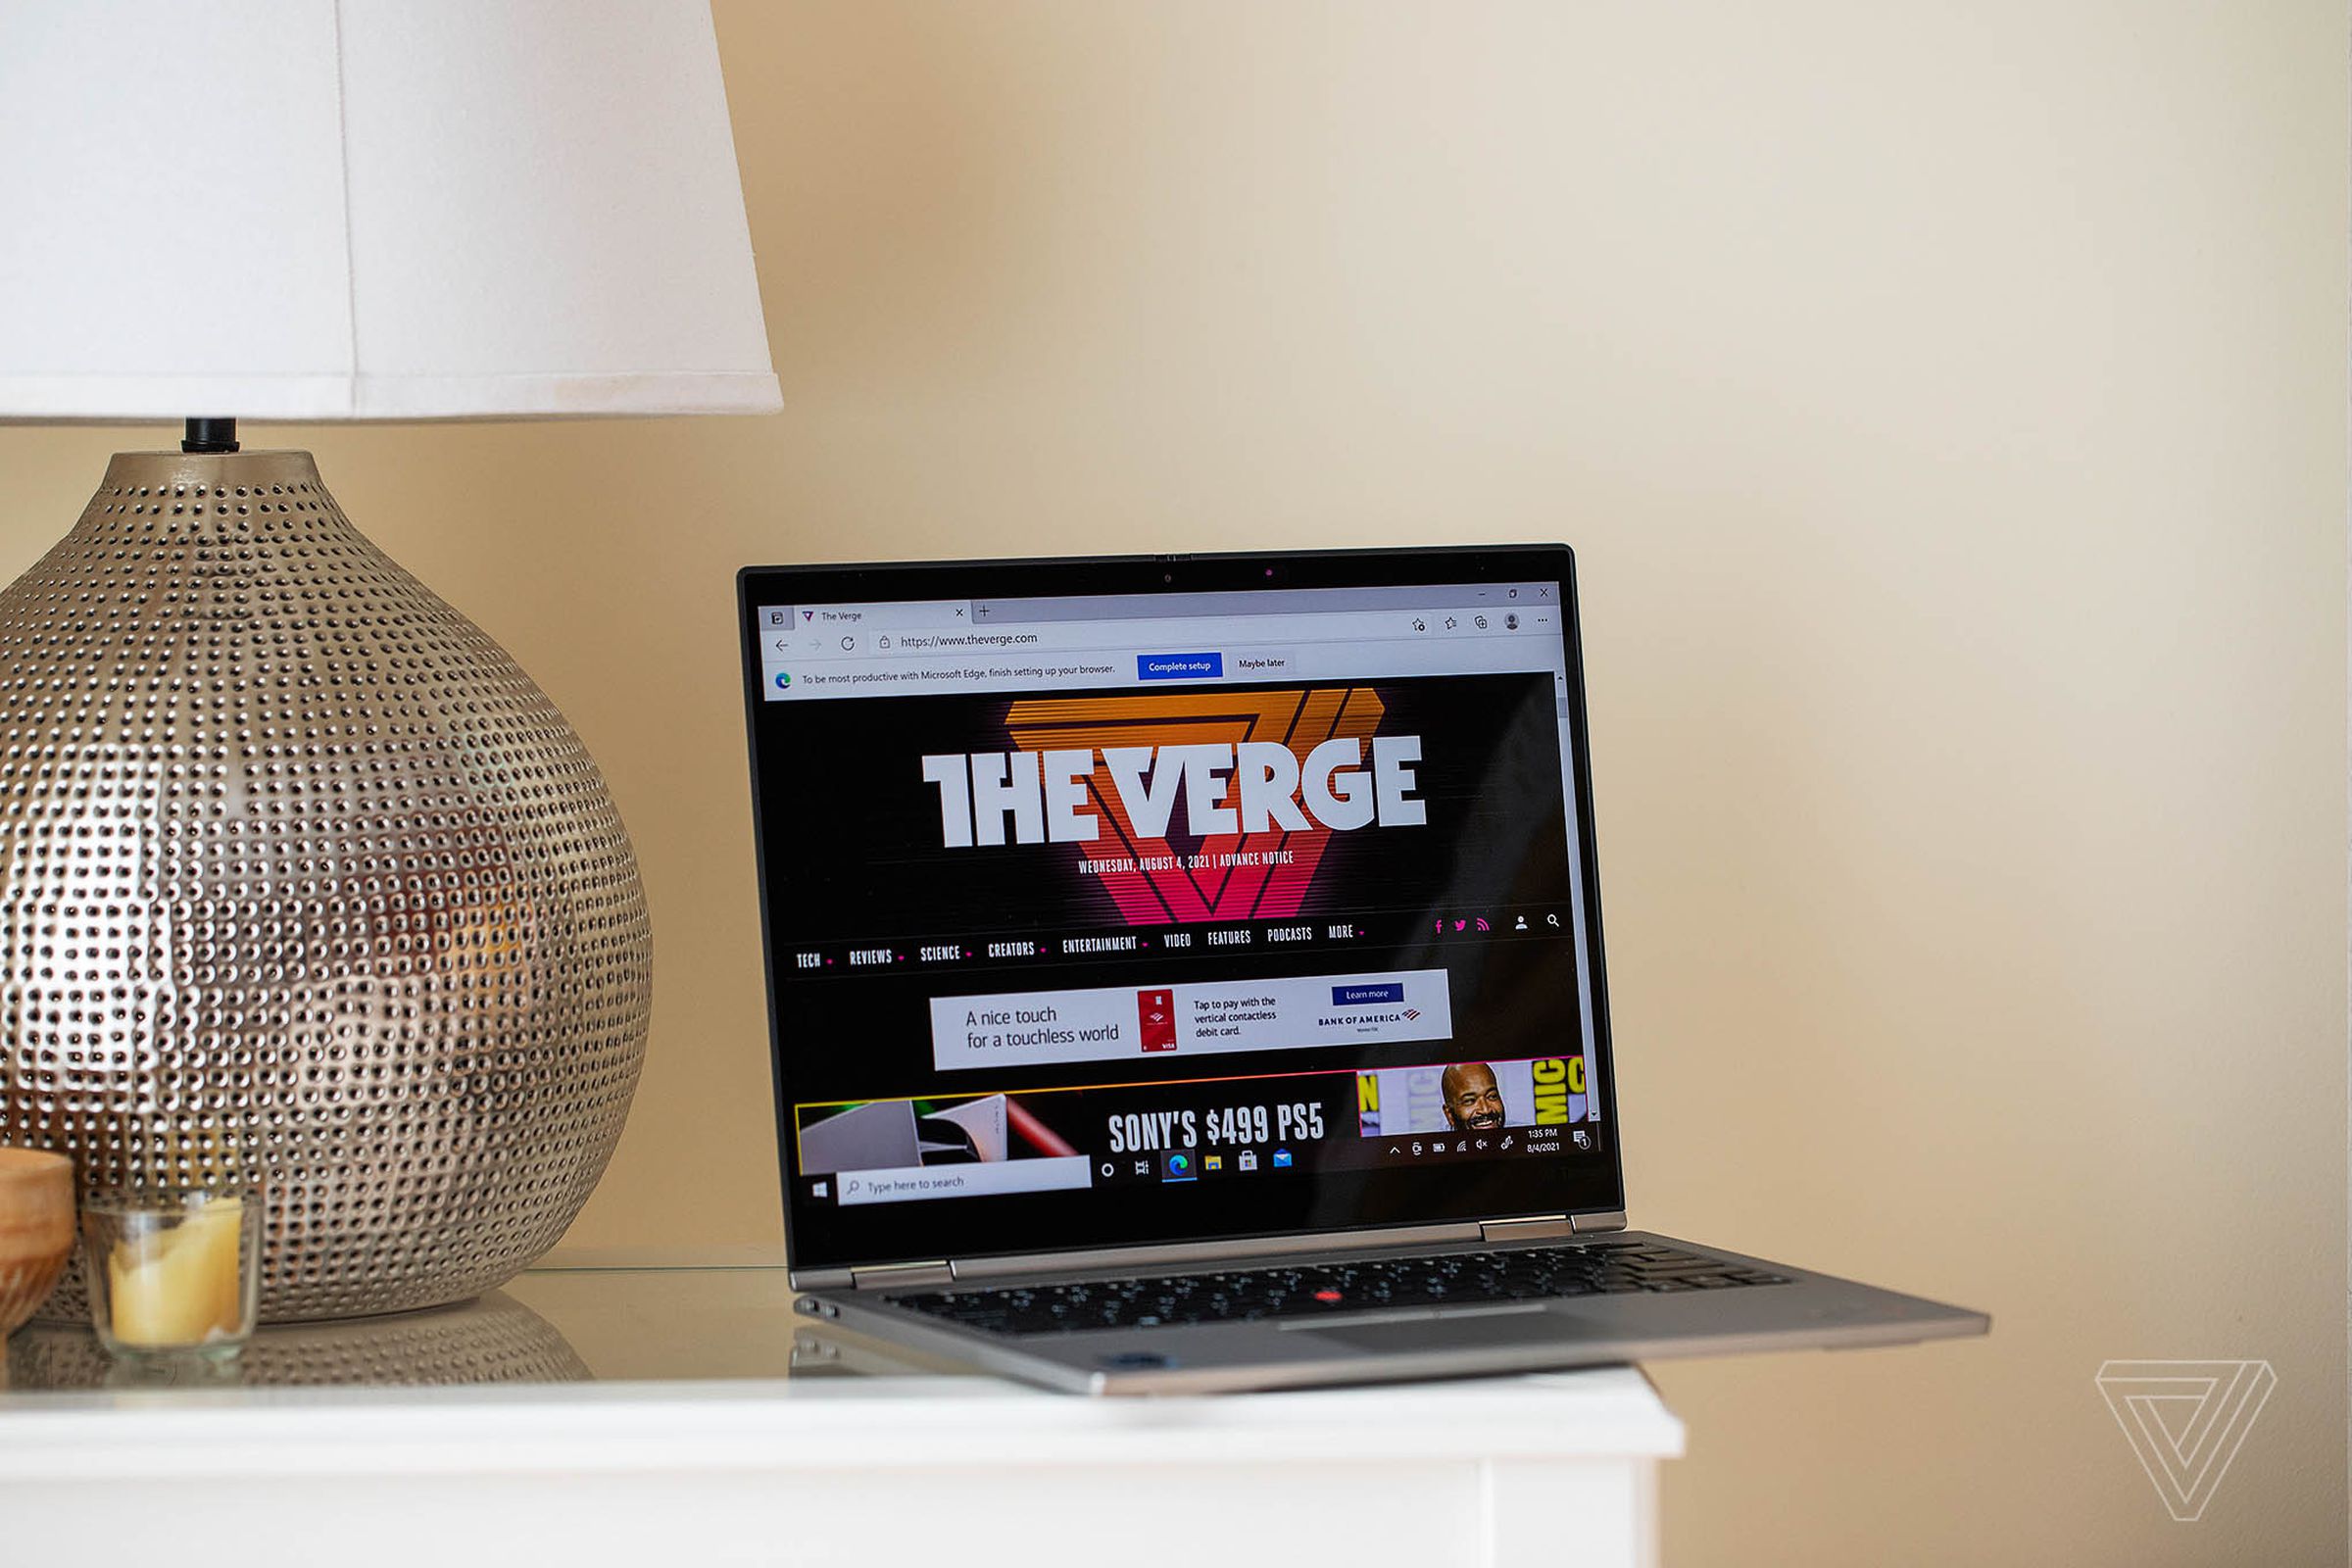 The Lenovo ThinkPad X1 Titanium Yoga open on a bedside table next to a lamp, angled to the right. The screen displays The Verge’s homepage.